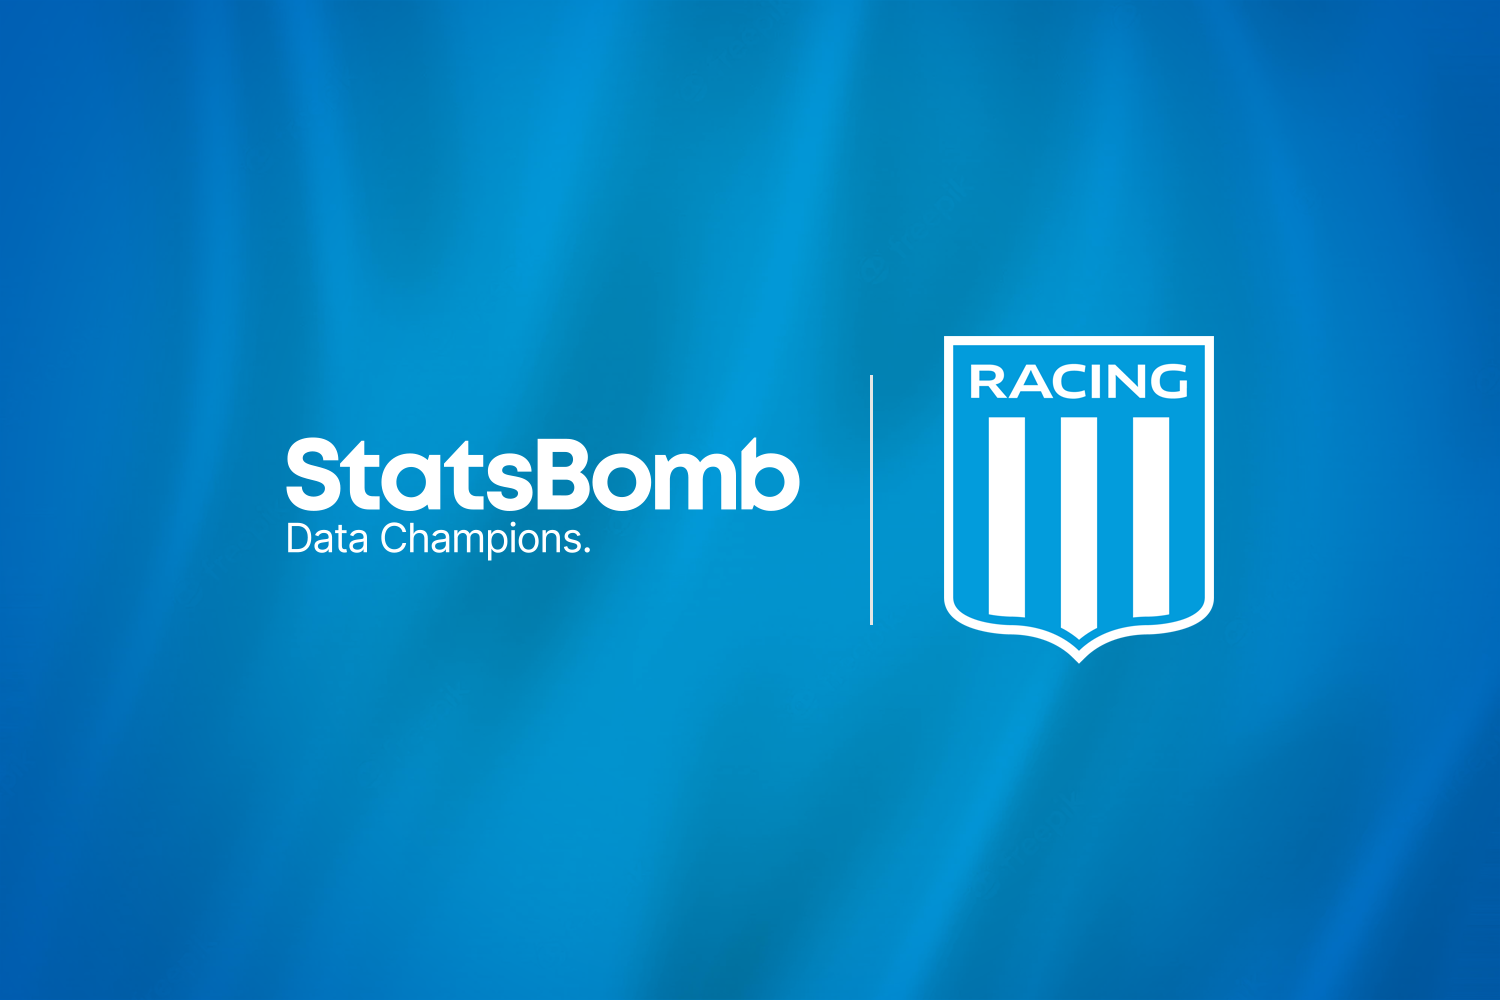 StatsBomb Enter Argentinian Market With Racing Club